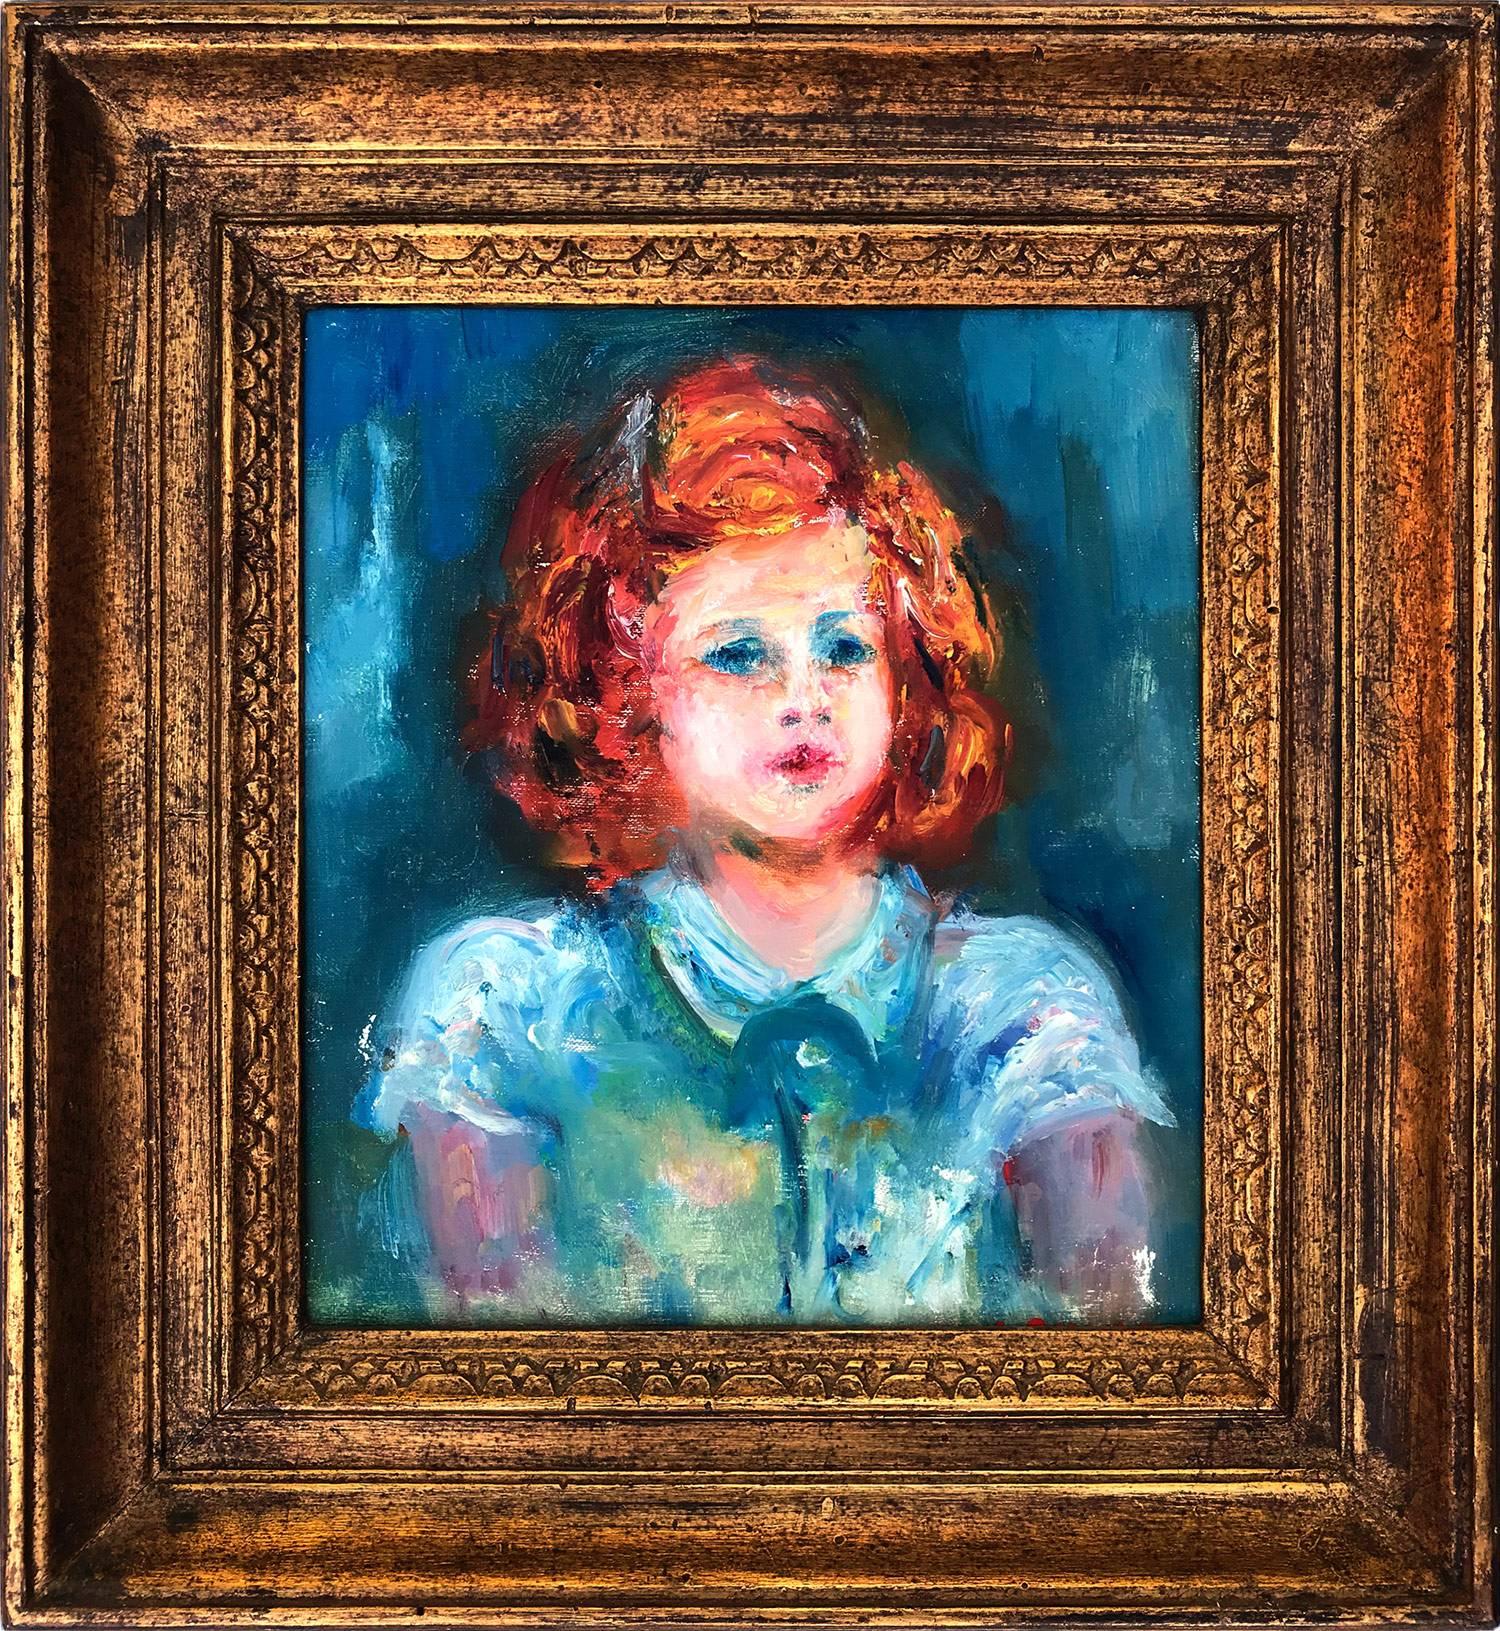 Jacques Zucker Portrait Painting - "Portrait of Young Girl in Blue Dress" Post-Impressionism Oil Painting on Canvas